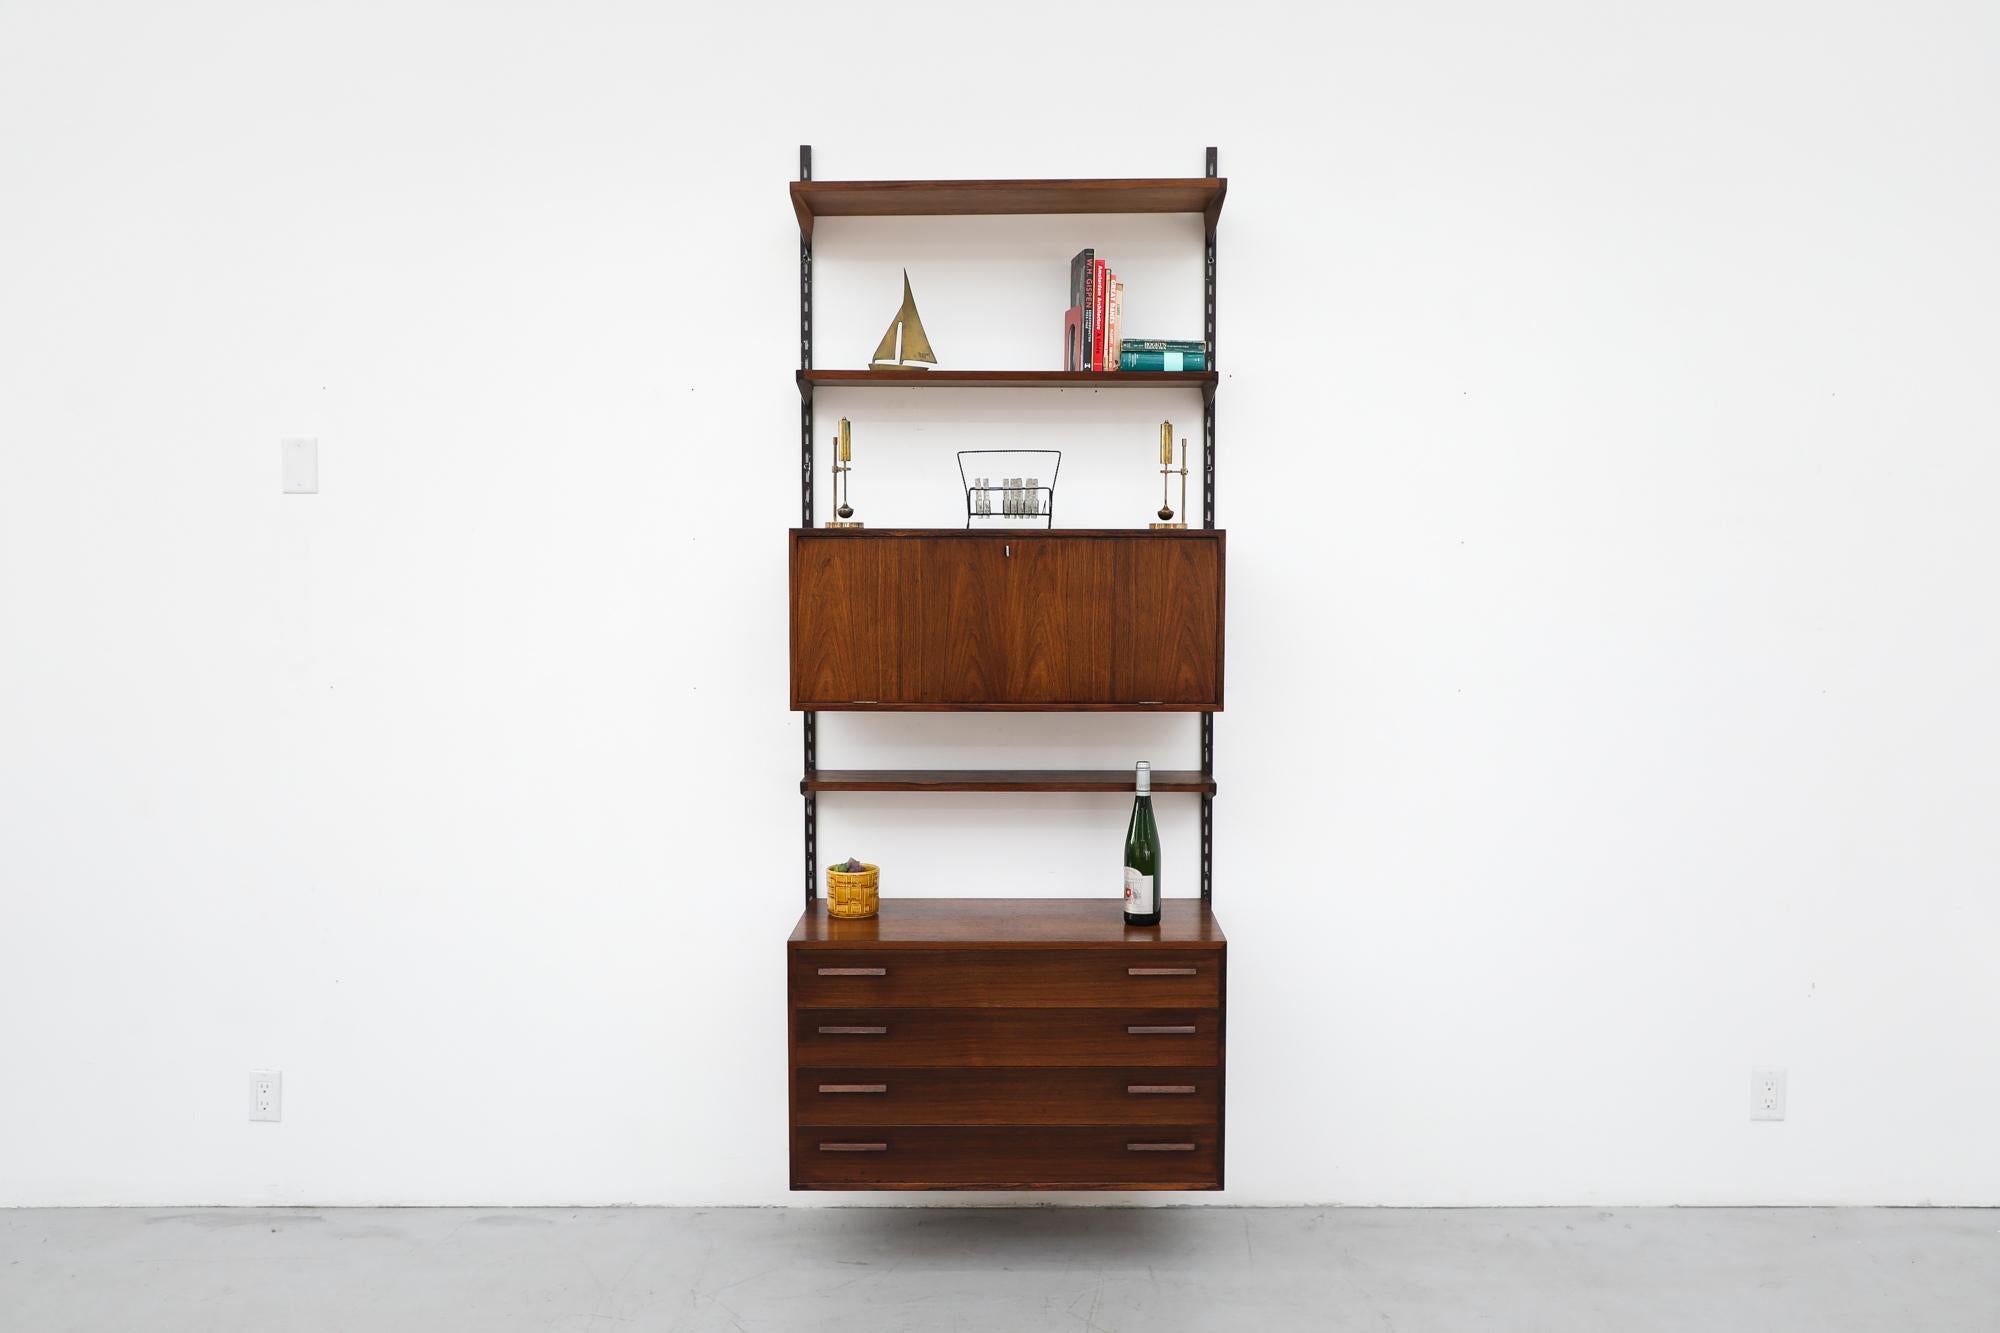 Charming midcentury wall-mount shelving system with locking drop down bar and lower dresser by Kai Kristiansen. Lightly refinished rosewood frame with carved drawer handles on metal brackets. In Impressive condition with light wear consistent with